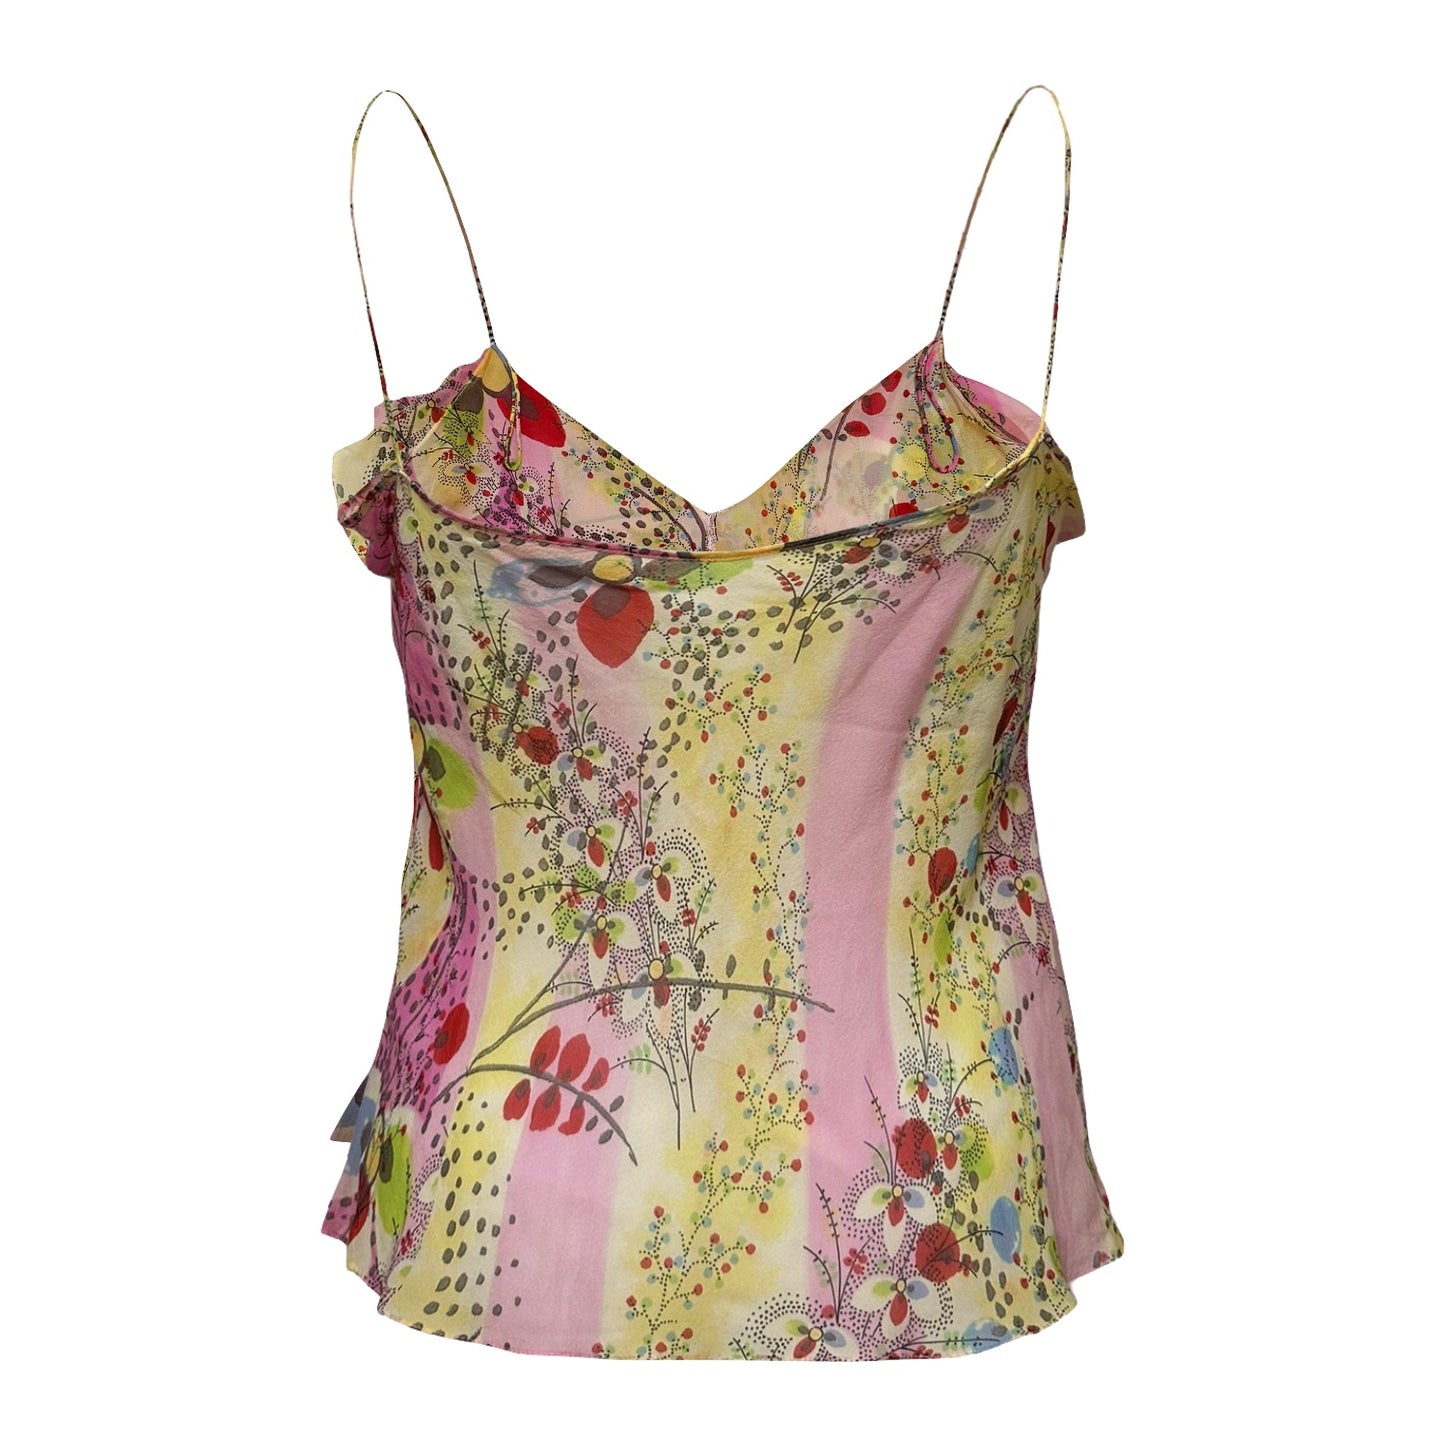 CHRISTIAN DIOR Spring Summer 2003 Floral Print Camisole